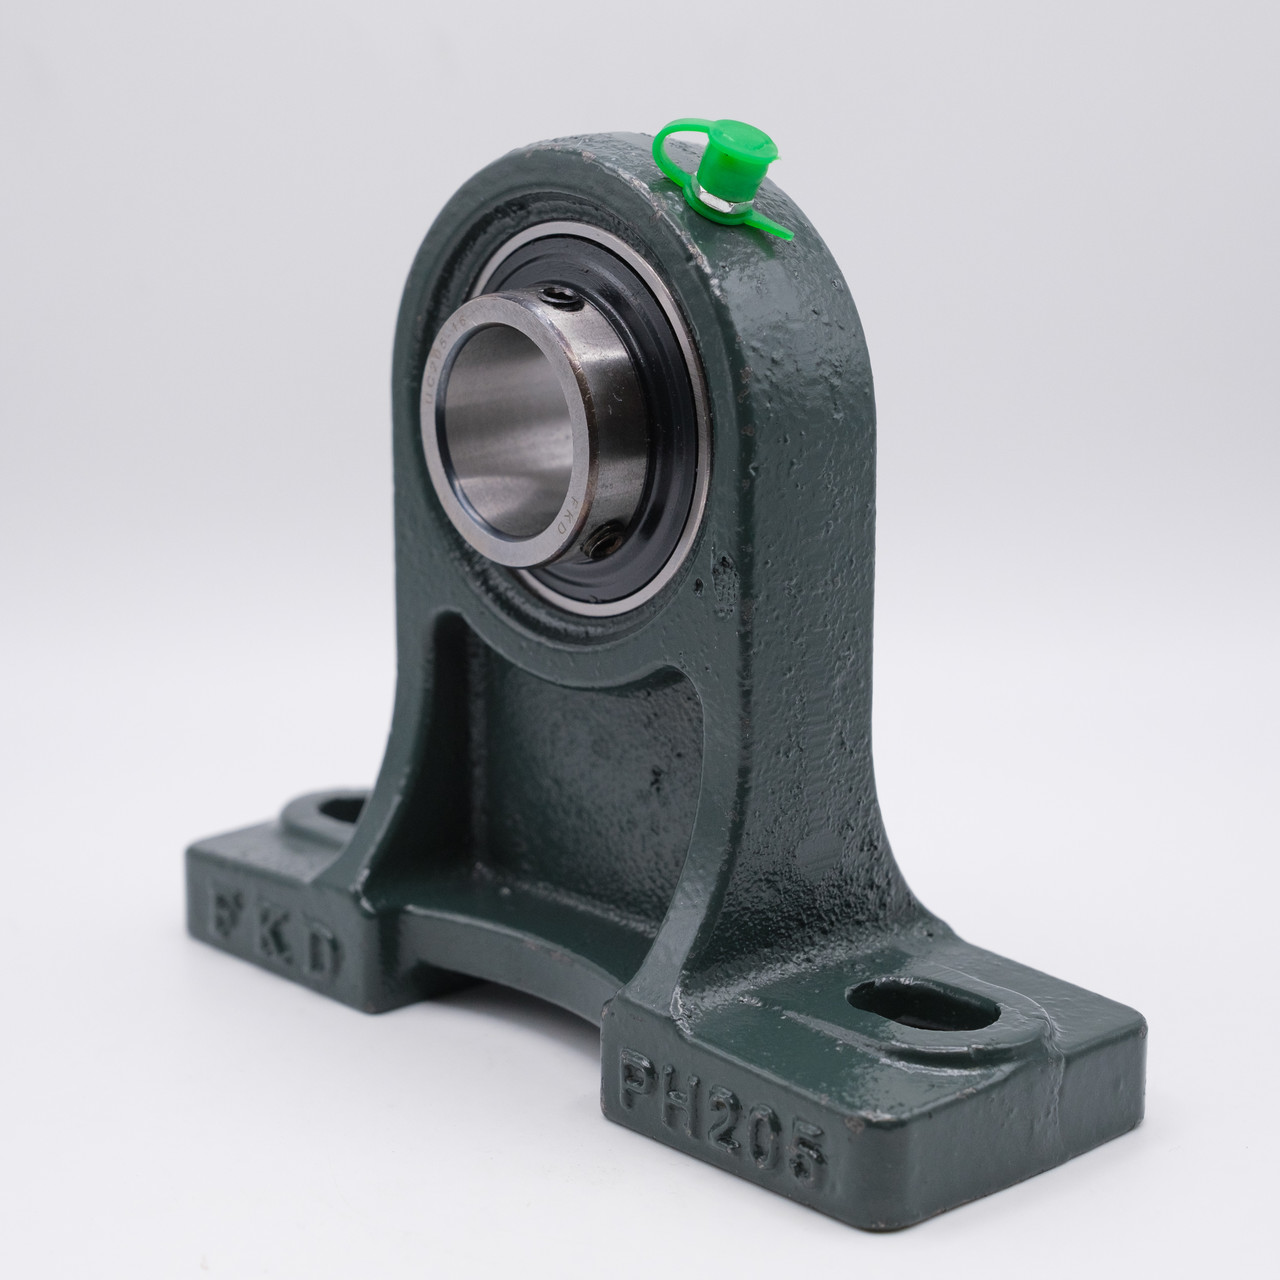 UCPH208 GENERIC 40mm Normal duty 2 Bolt Cast Iron Pillow Block Housed Unit Bearing with extended base to centre height - Metric Thumbnail